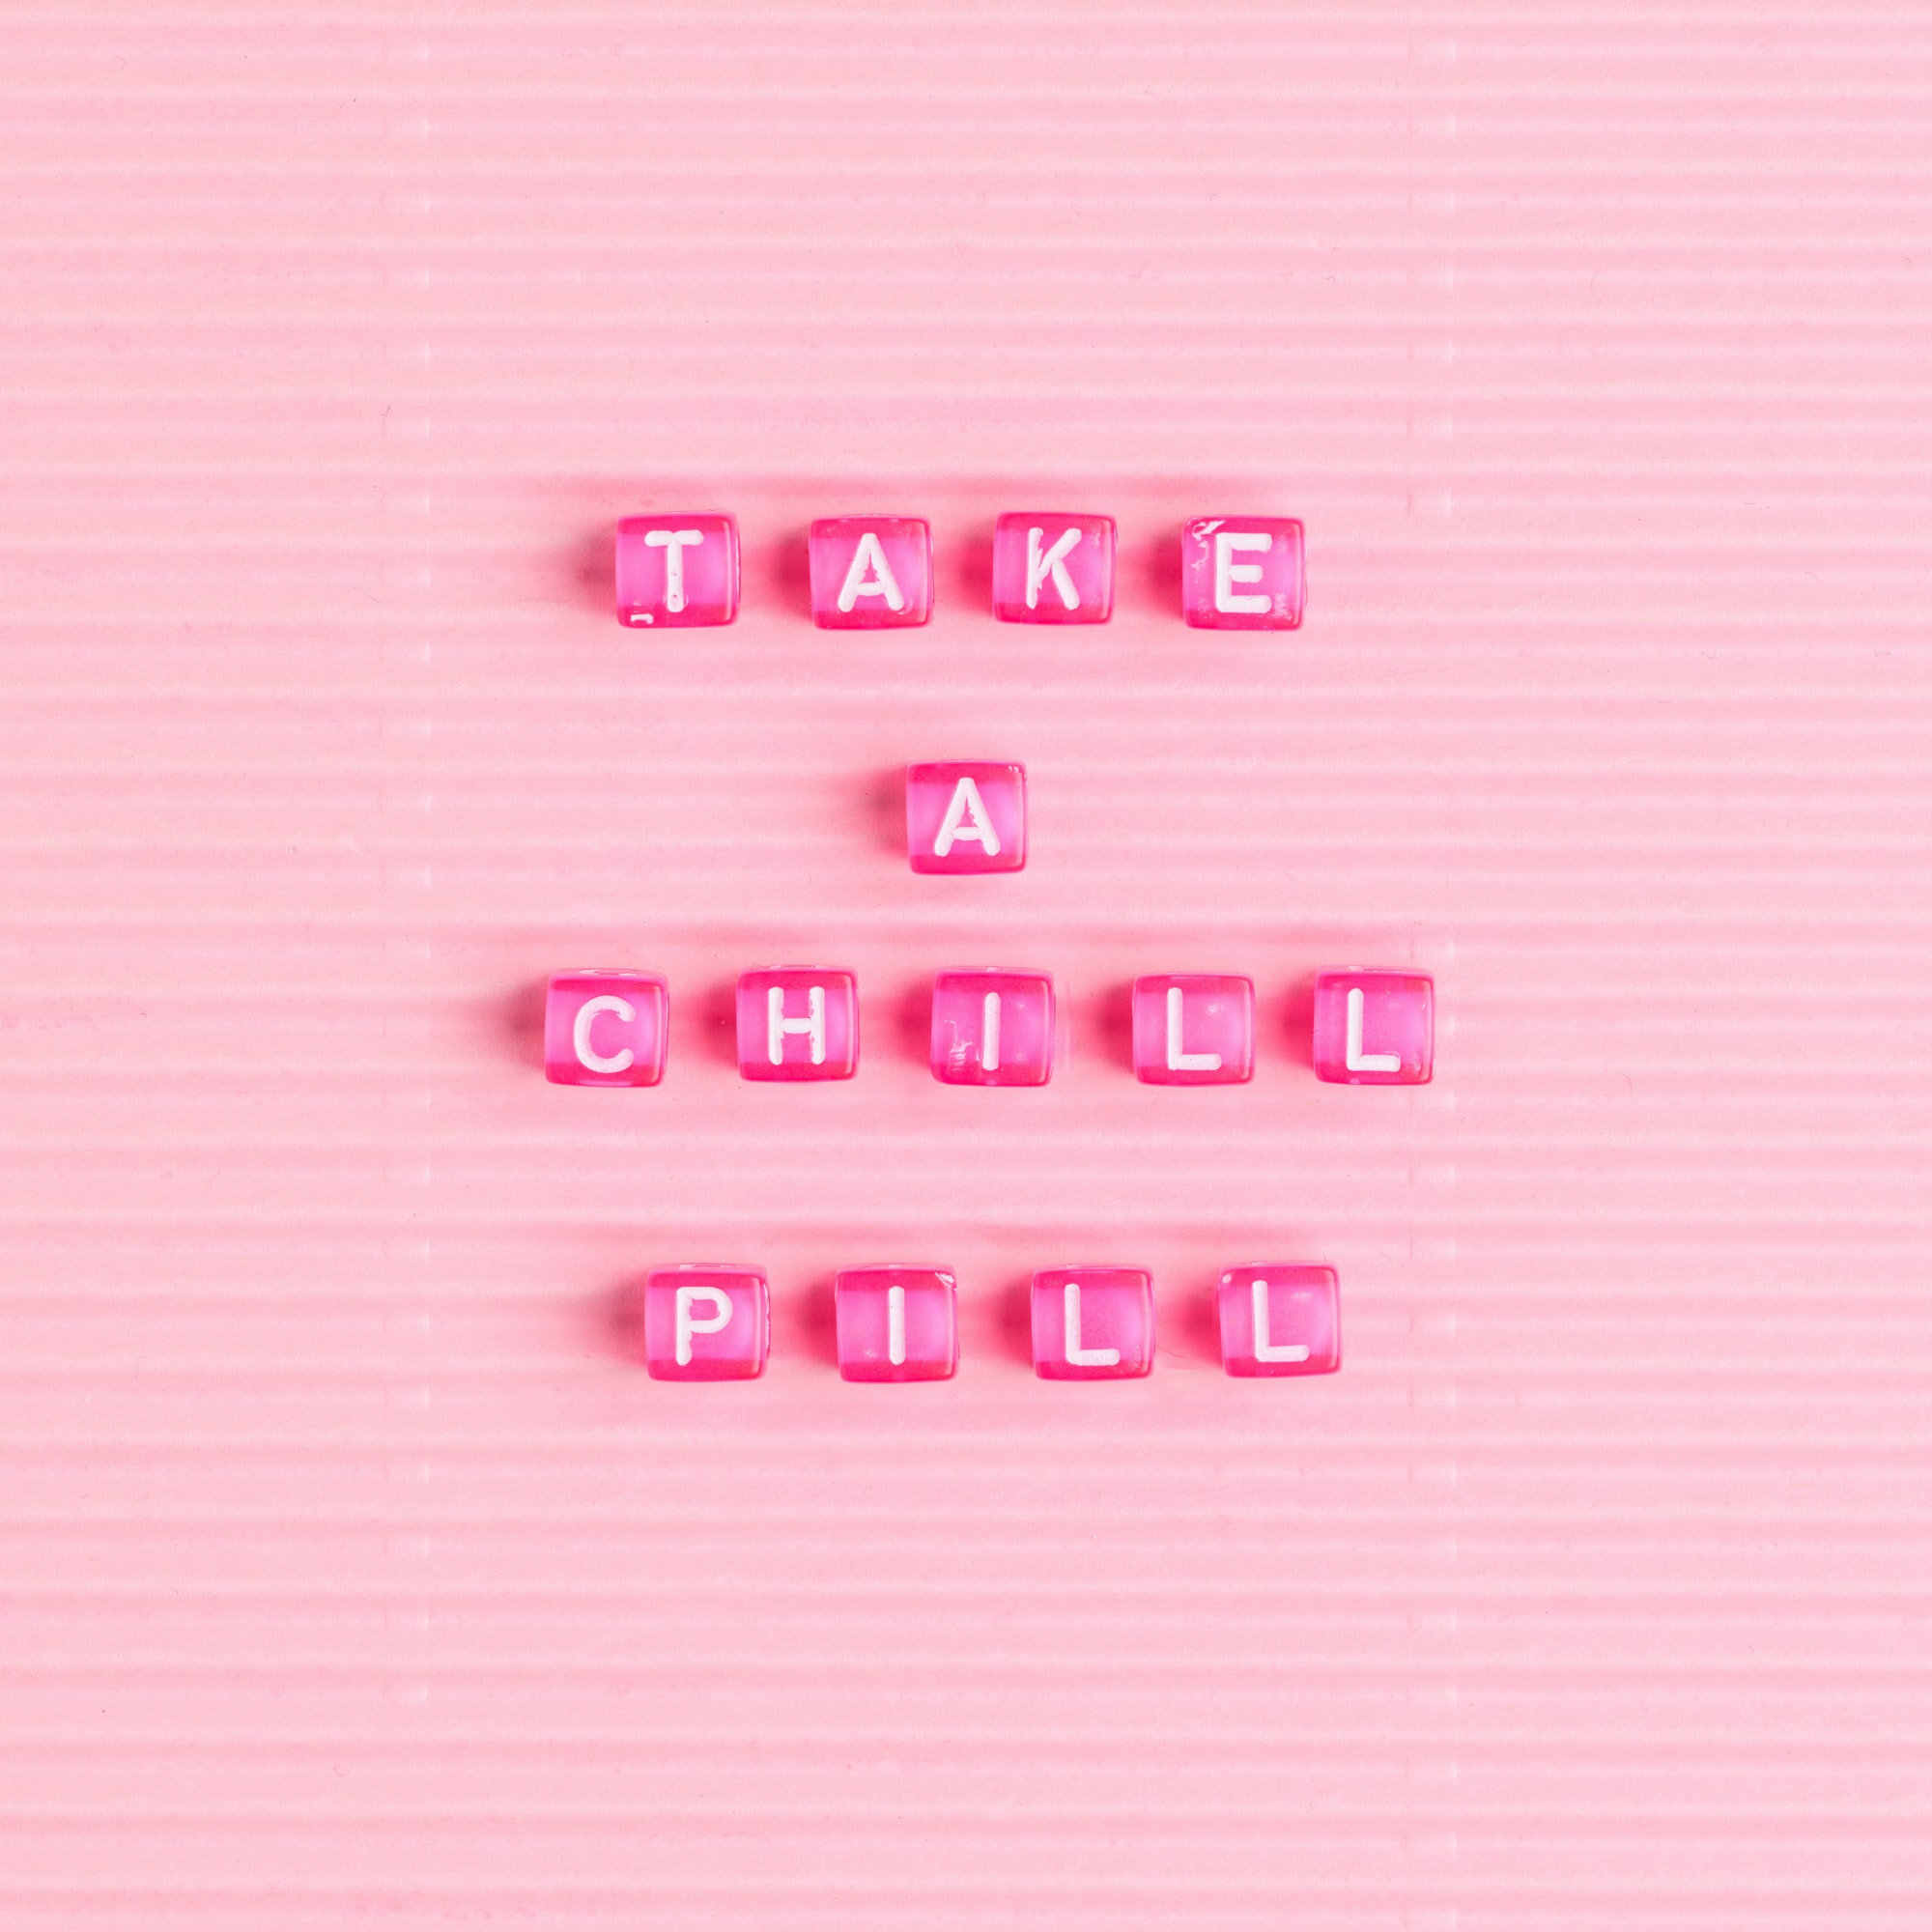 TAKE A CHILL PILL beads text typography